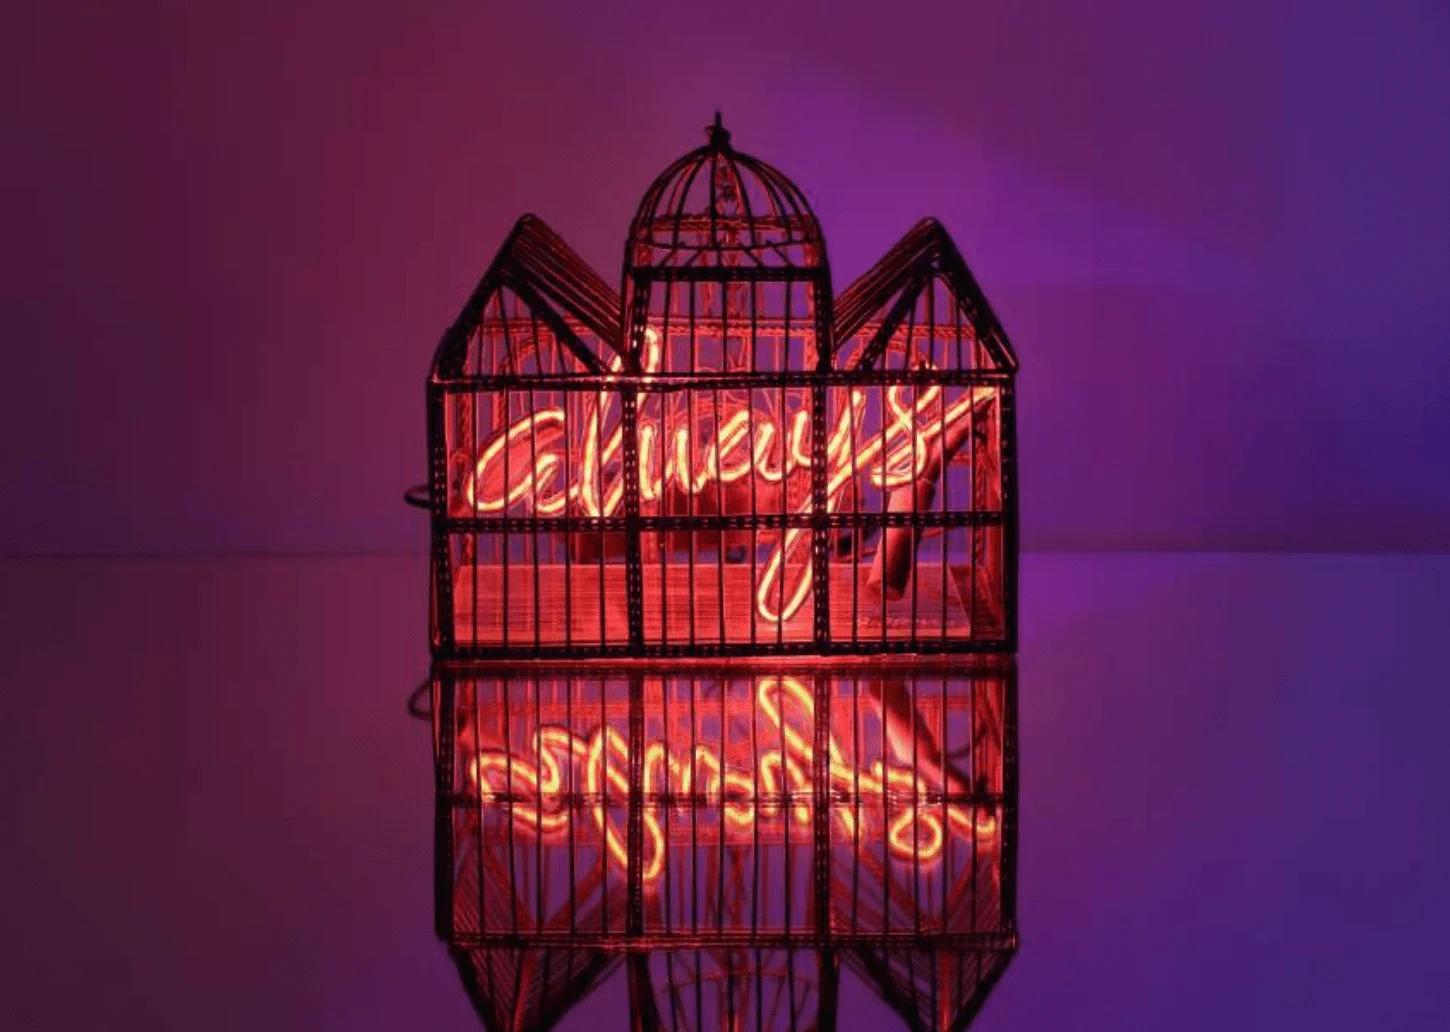 Olivia Steele
Always (Birdcage), 2022
Artist plaque included on reverse
Hand blown and colored neon, vintage birdcage, and mirror
9.06 x 9.45 x 4.72 inches
Edition of 3

This piece is currently on display at Art Angels in Los Angeles. 